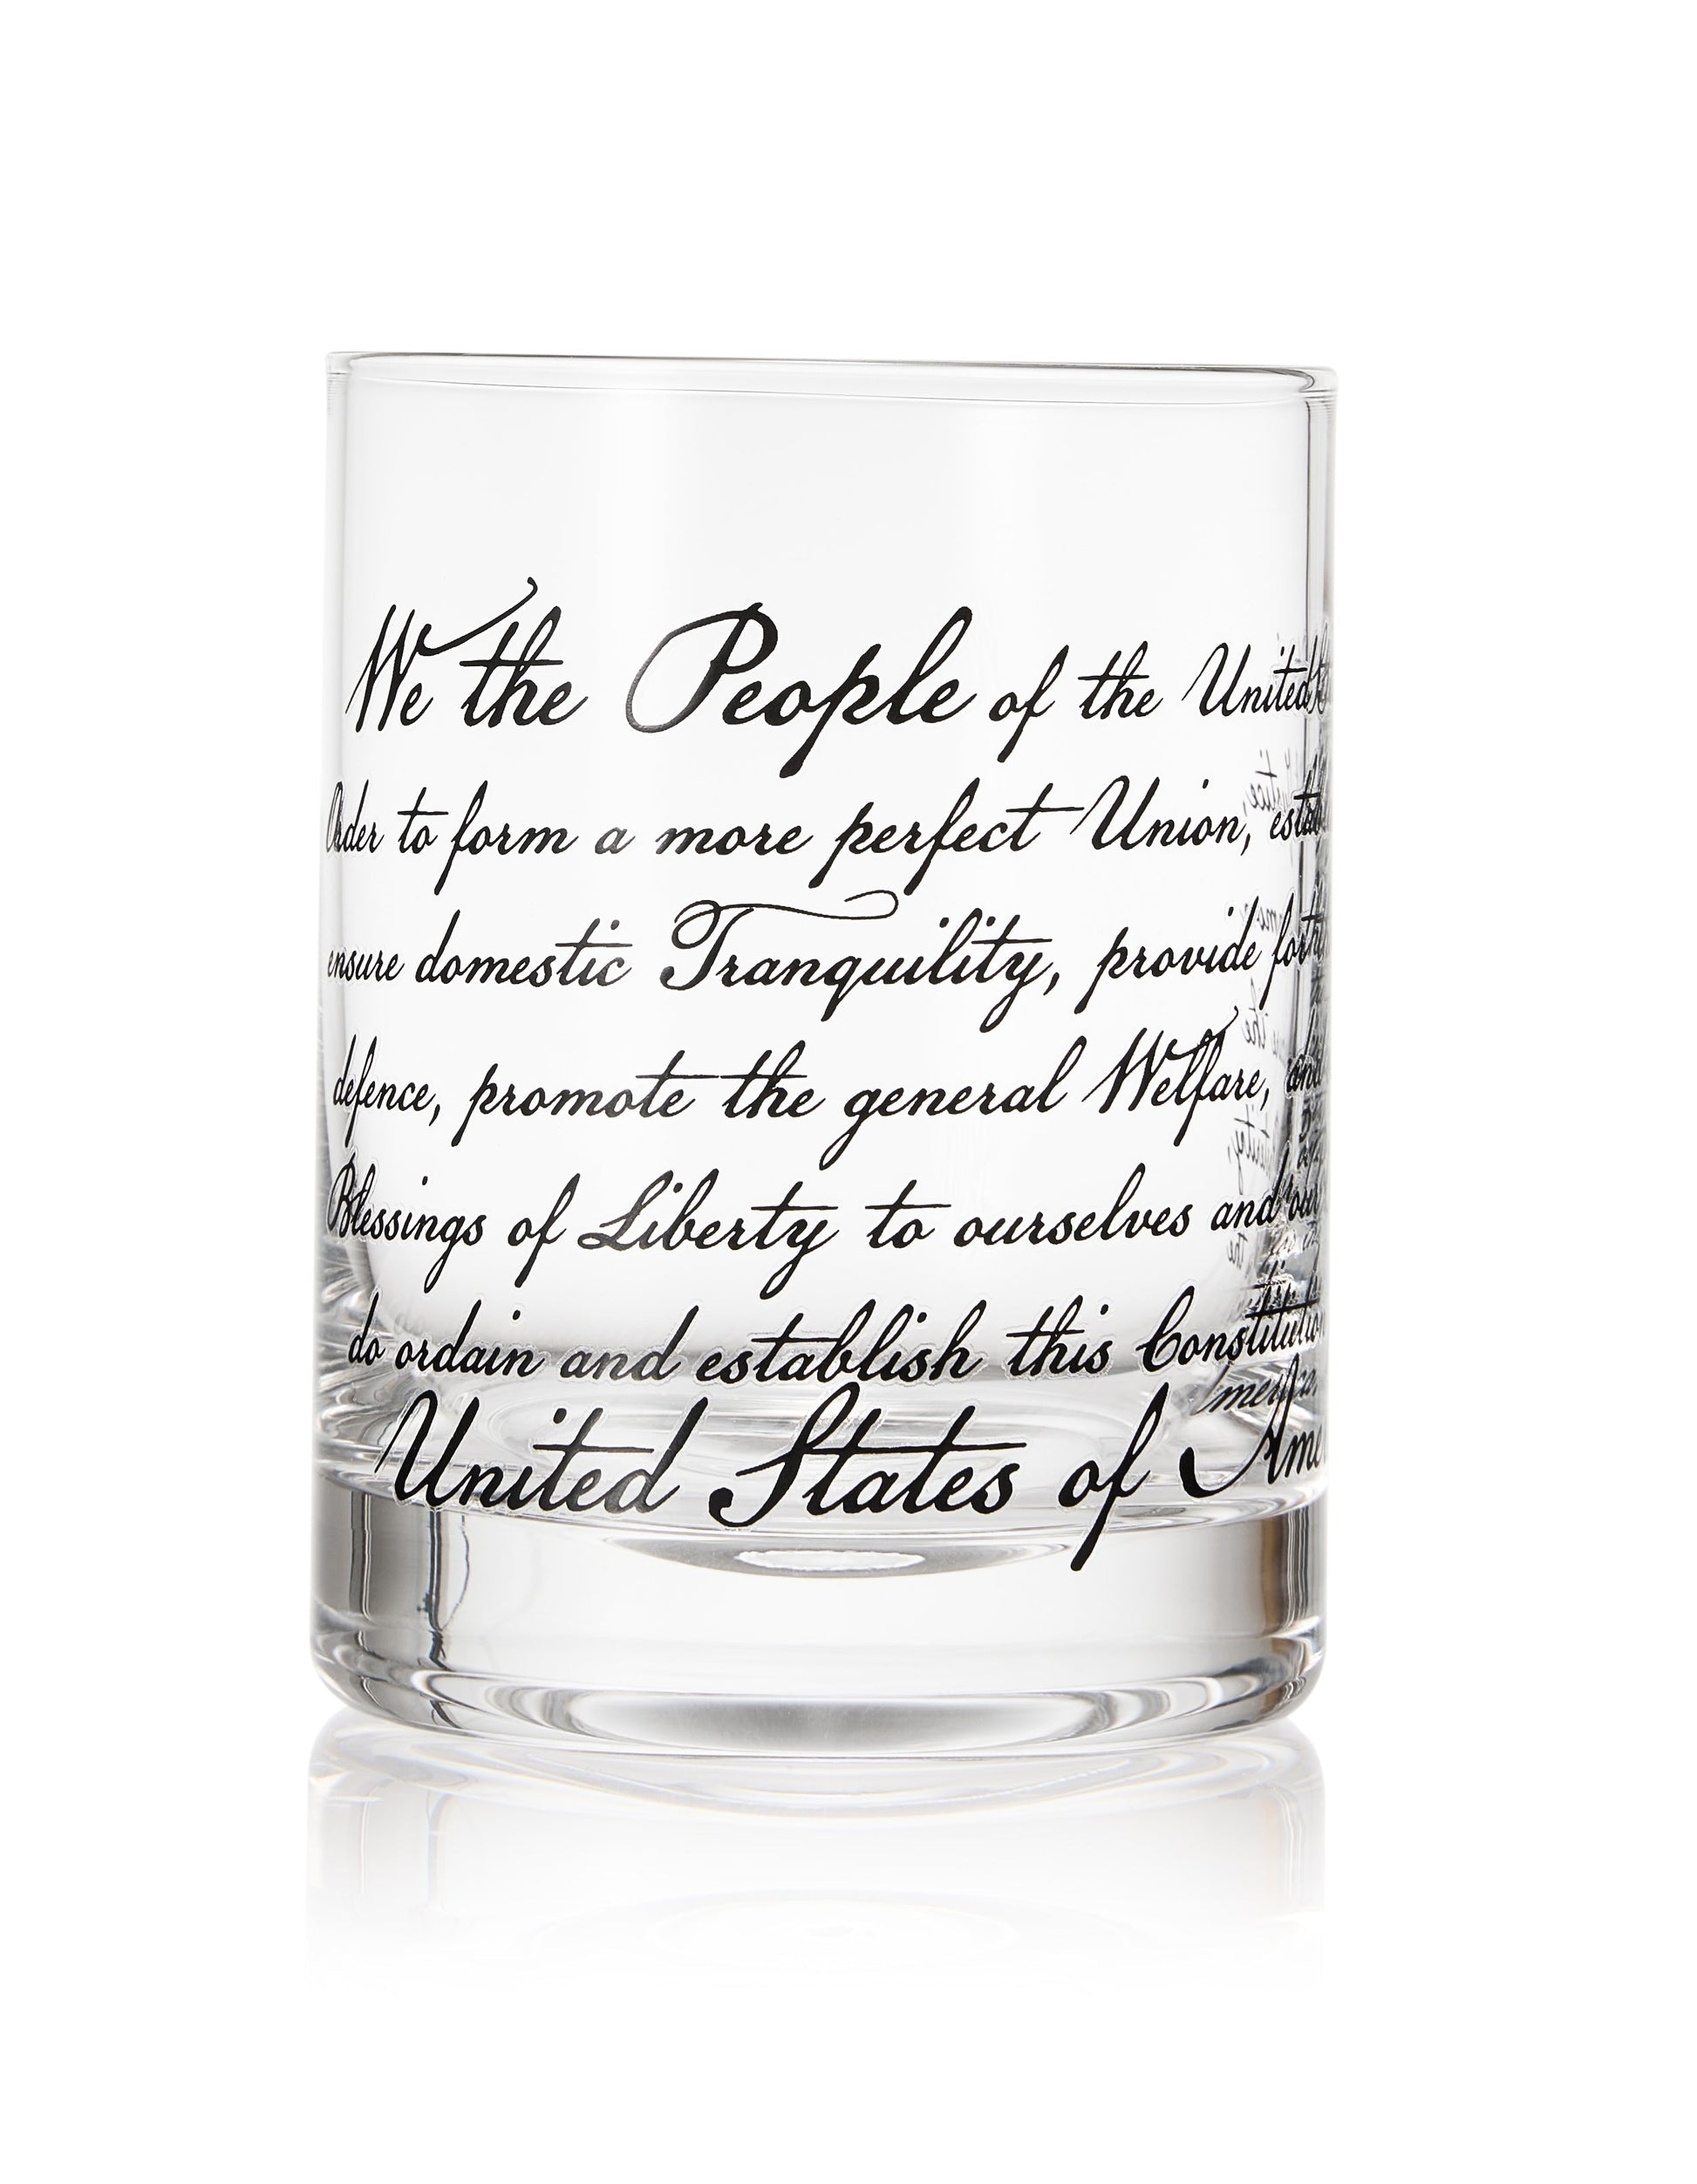 Whiskey Glasses – United States Constitution - Wood American Flag Tray & Set of 4 We The People 10oz America Glassware, Old Fashioned Rocks Glass, Freedom Of Speech Law Gift Set US Patriotic-5